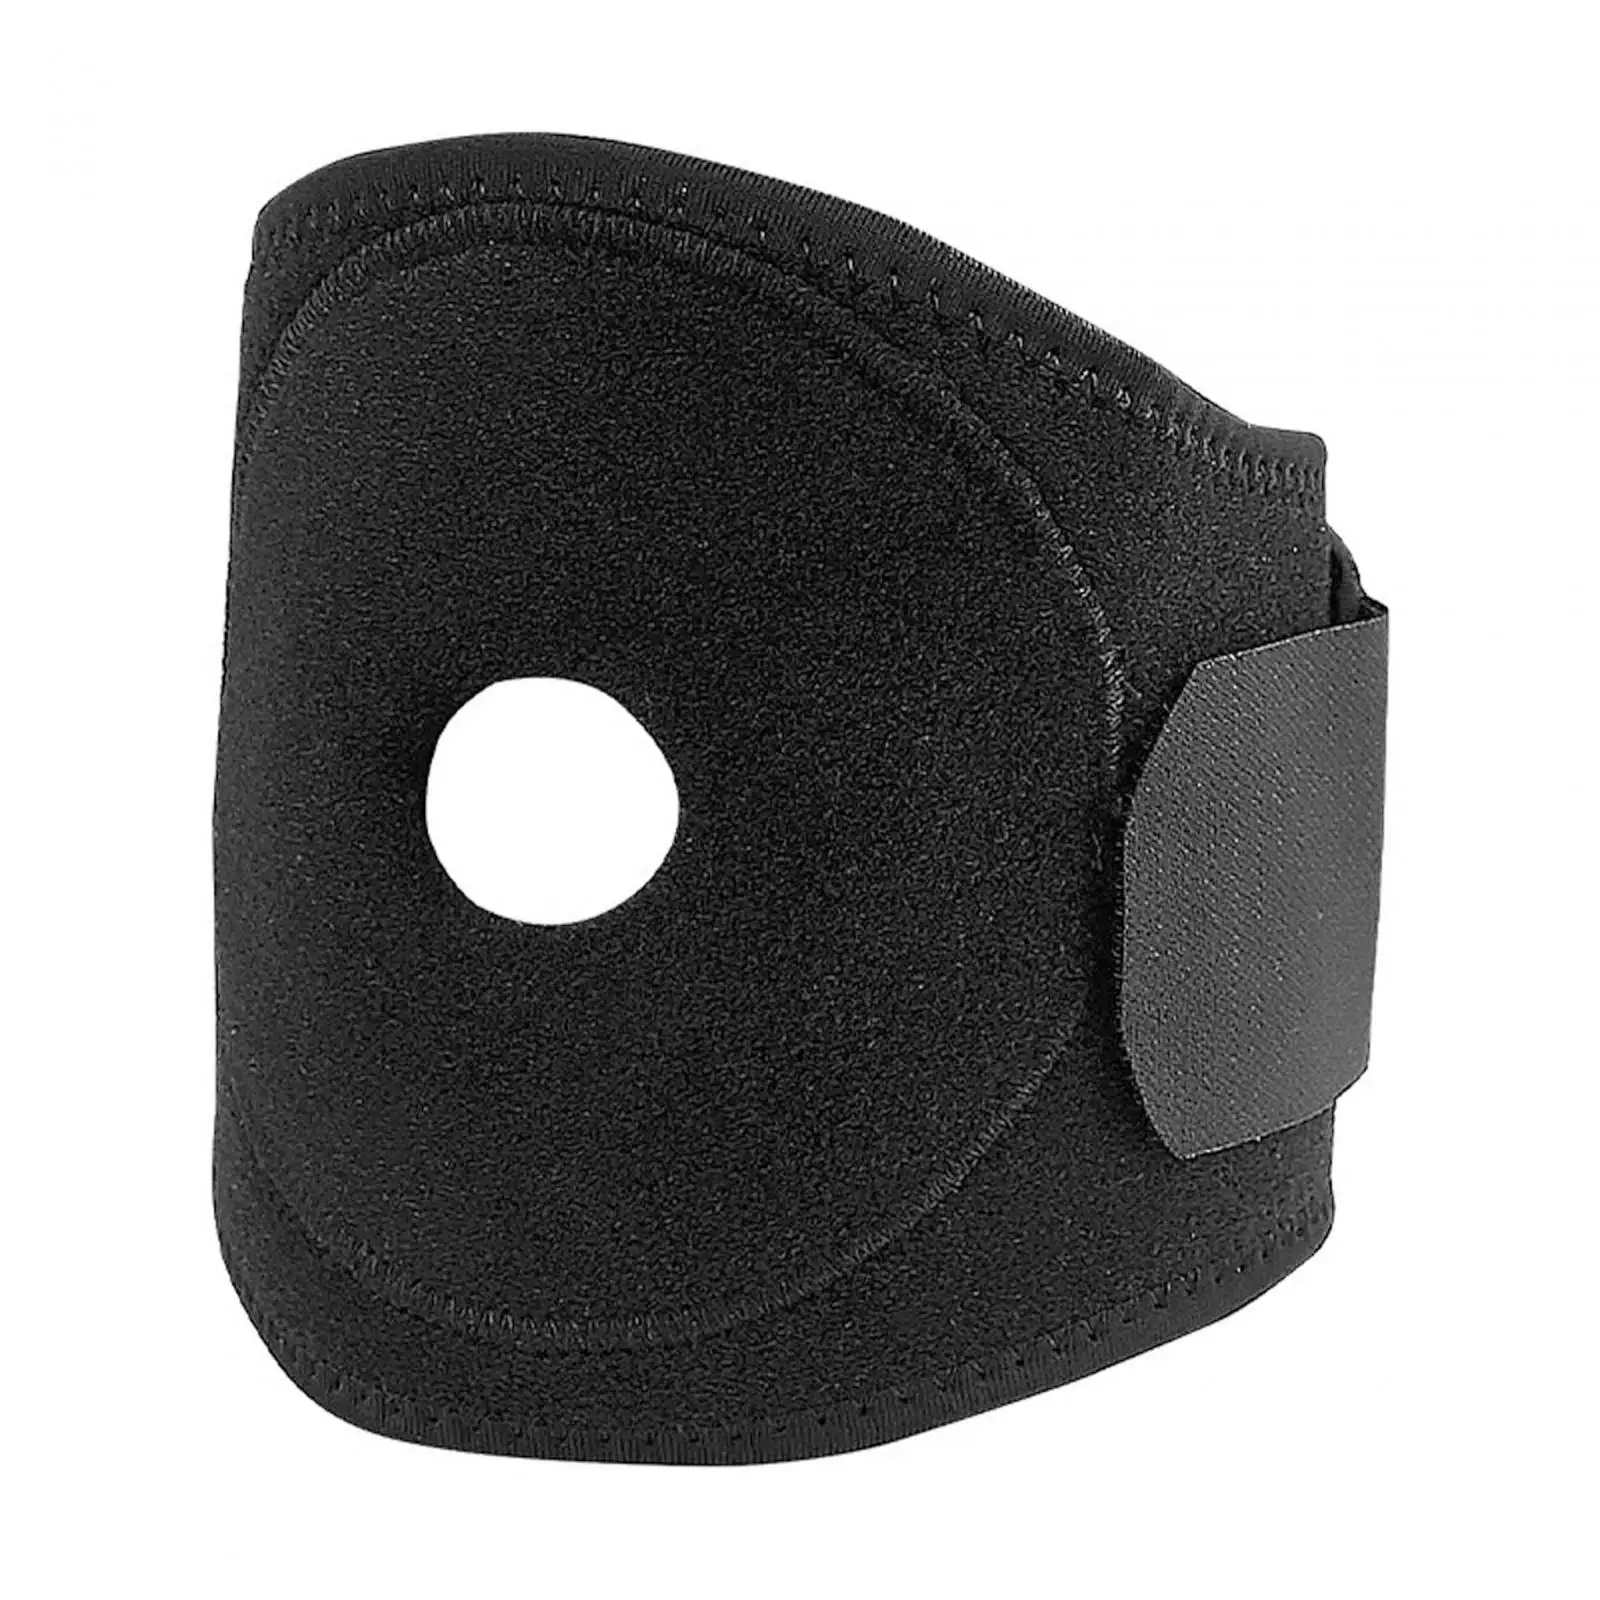 Kneepad with Foldable Aluminum Plate Portable Stable Thickening Knee Support Sleeve for Running Cycling Soccer Volleyball Hiking